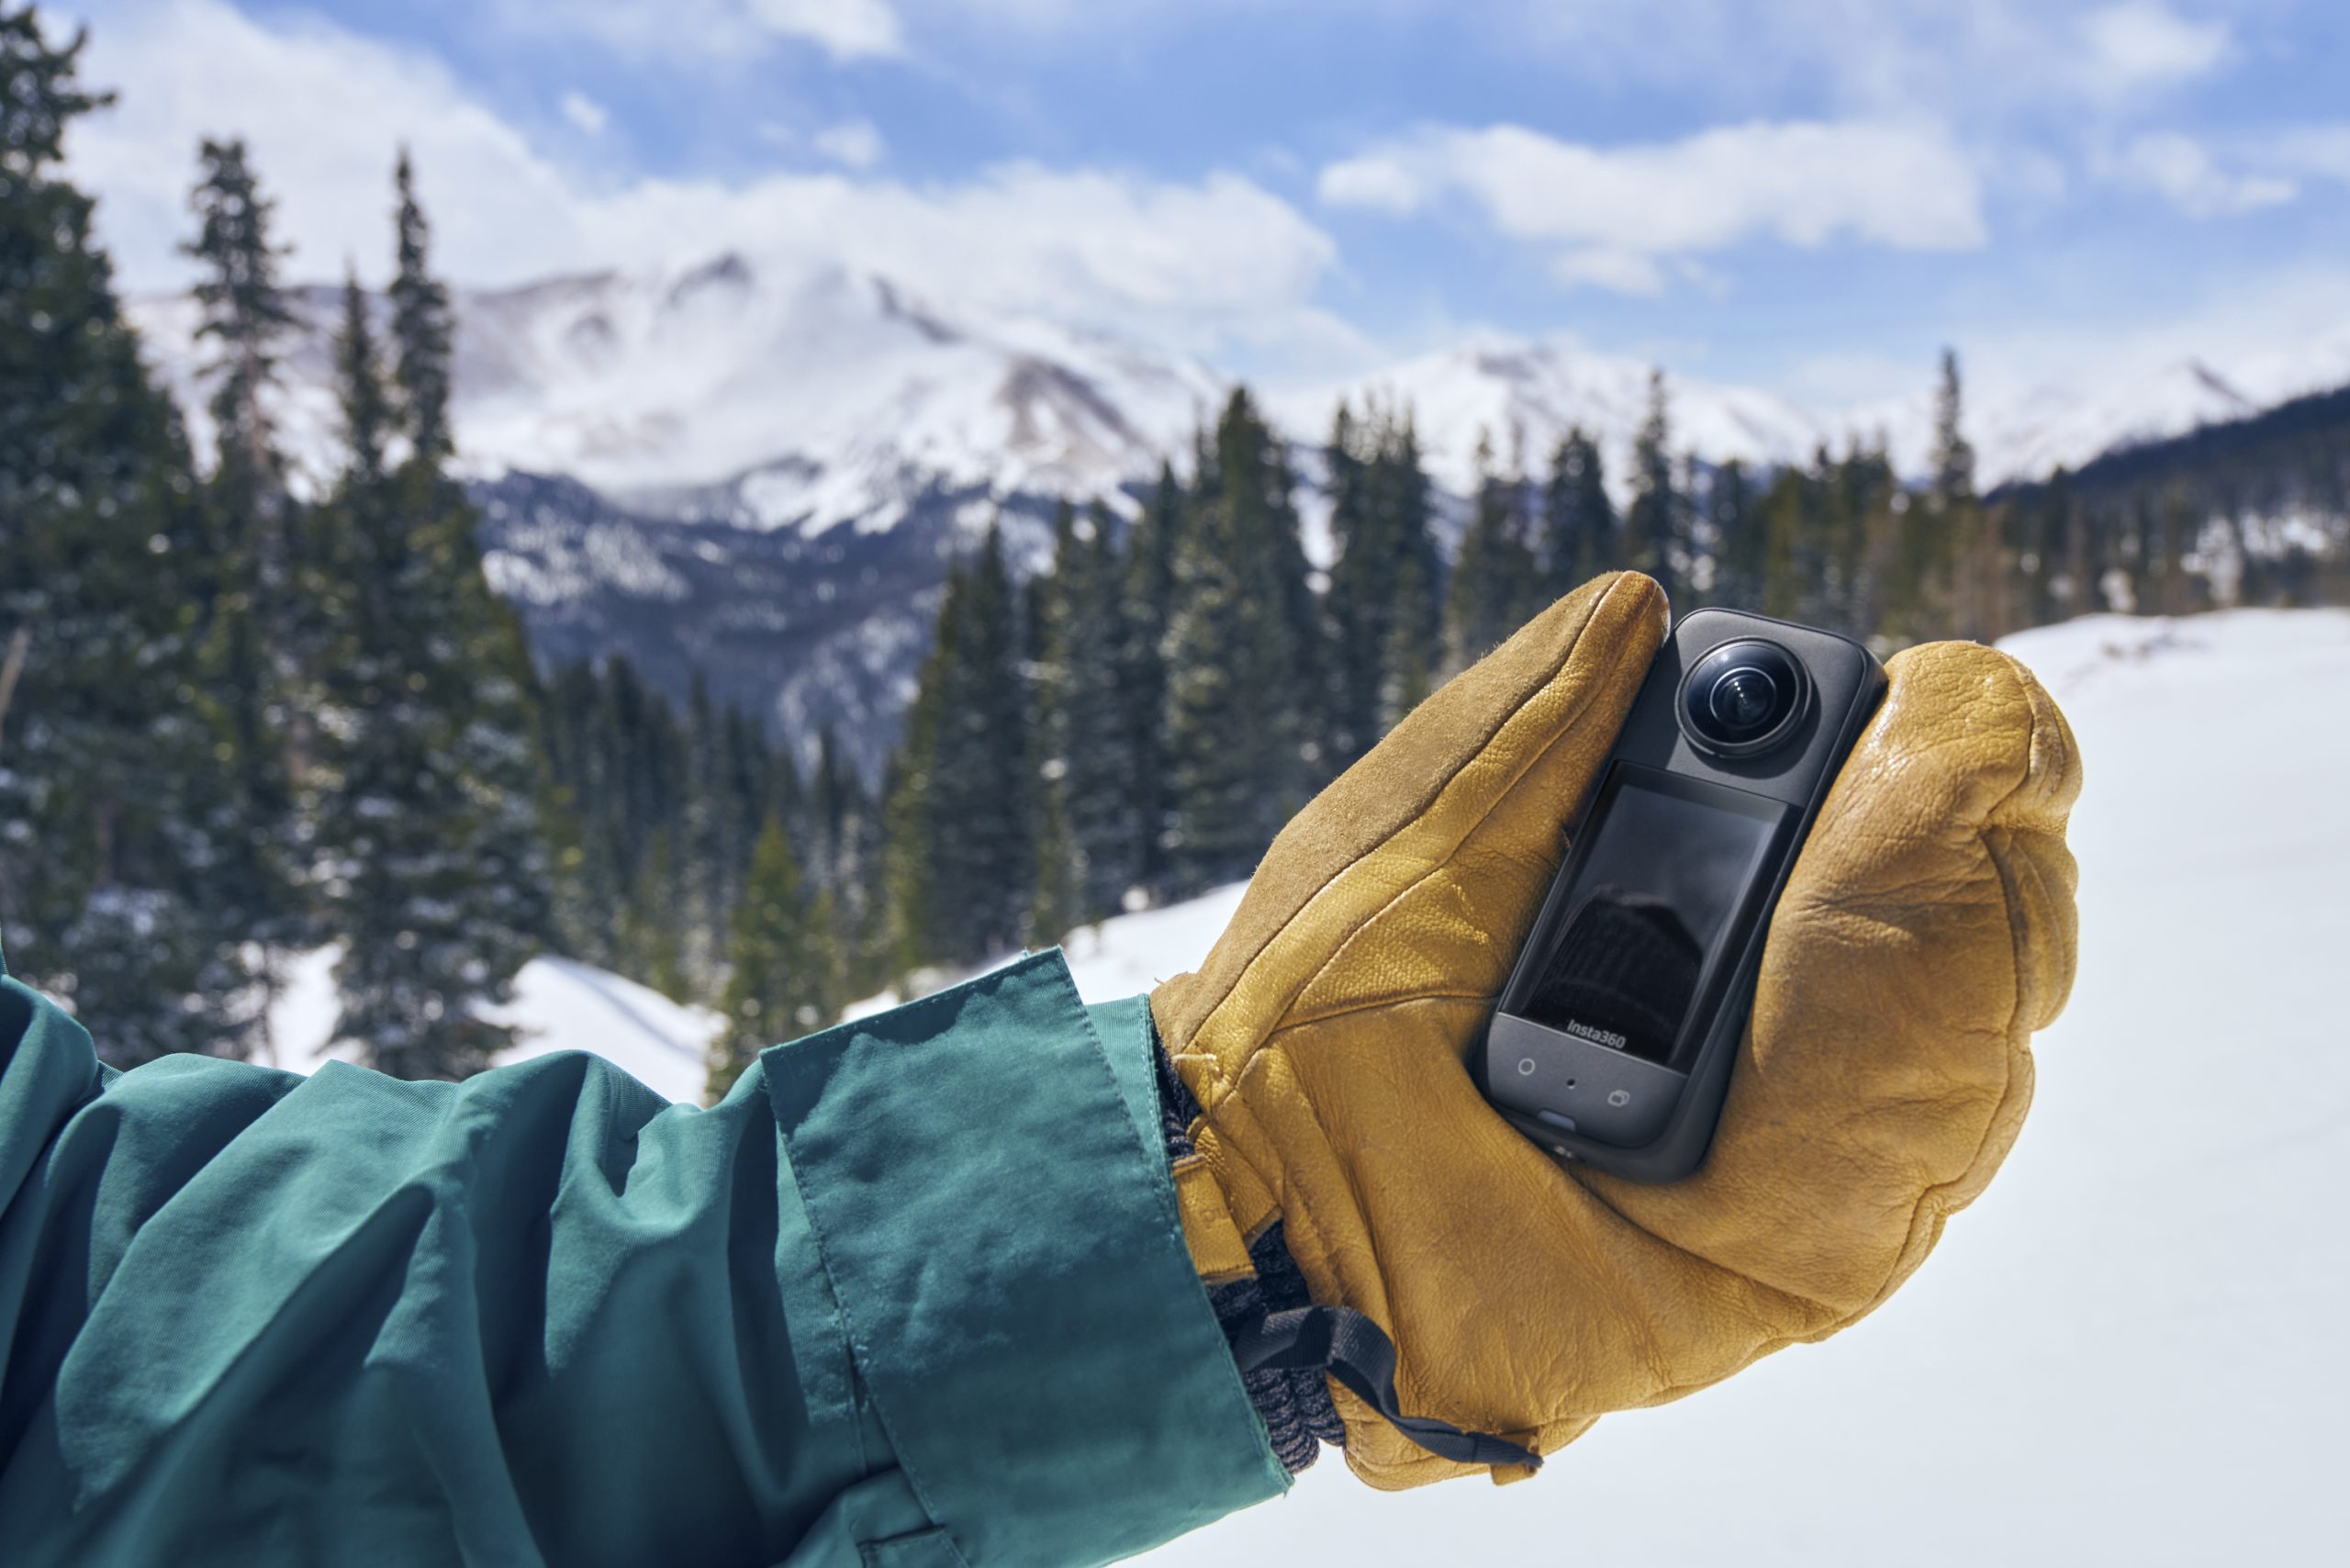 GEAR REVIEW] Insta360 X3: The Sleekest Action Camera for Skiing - SnowBrains